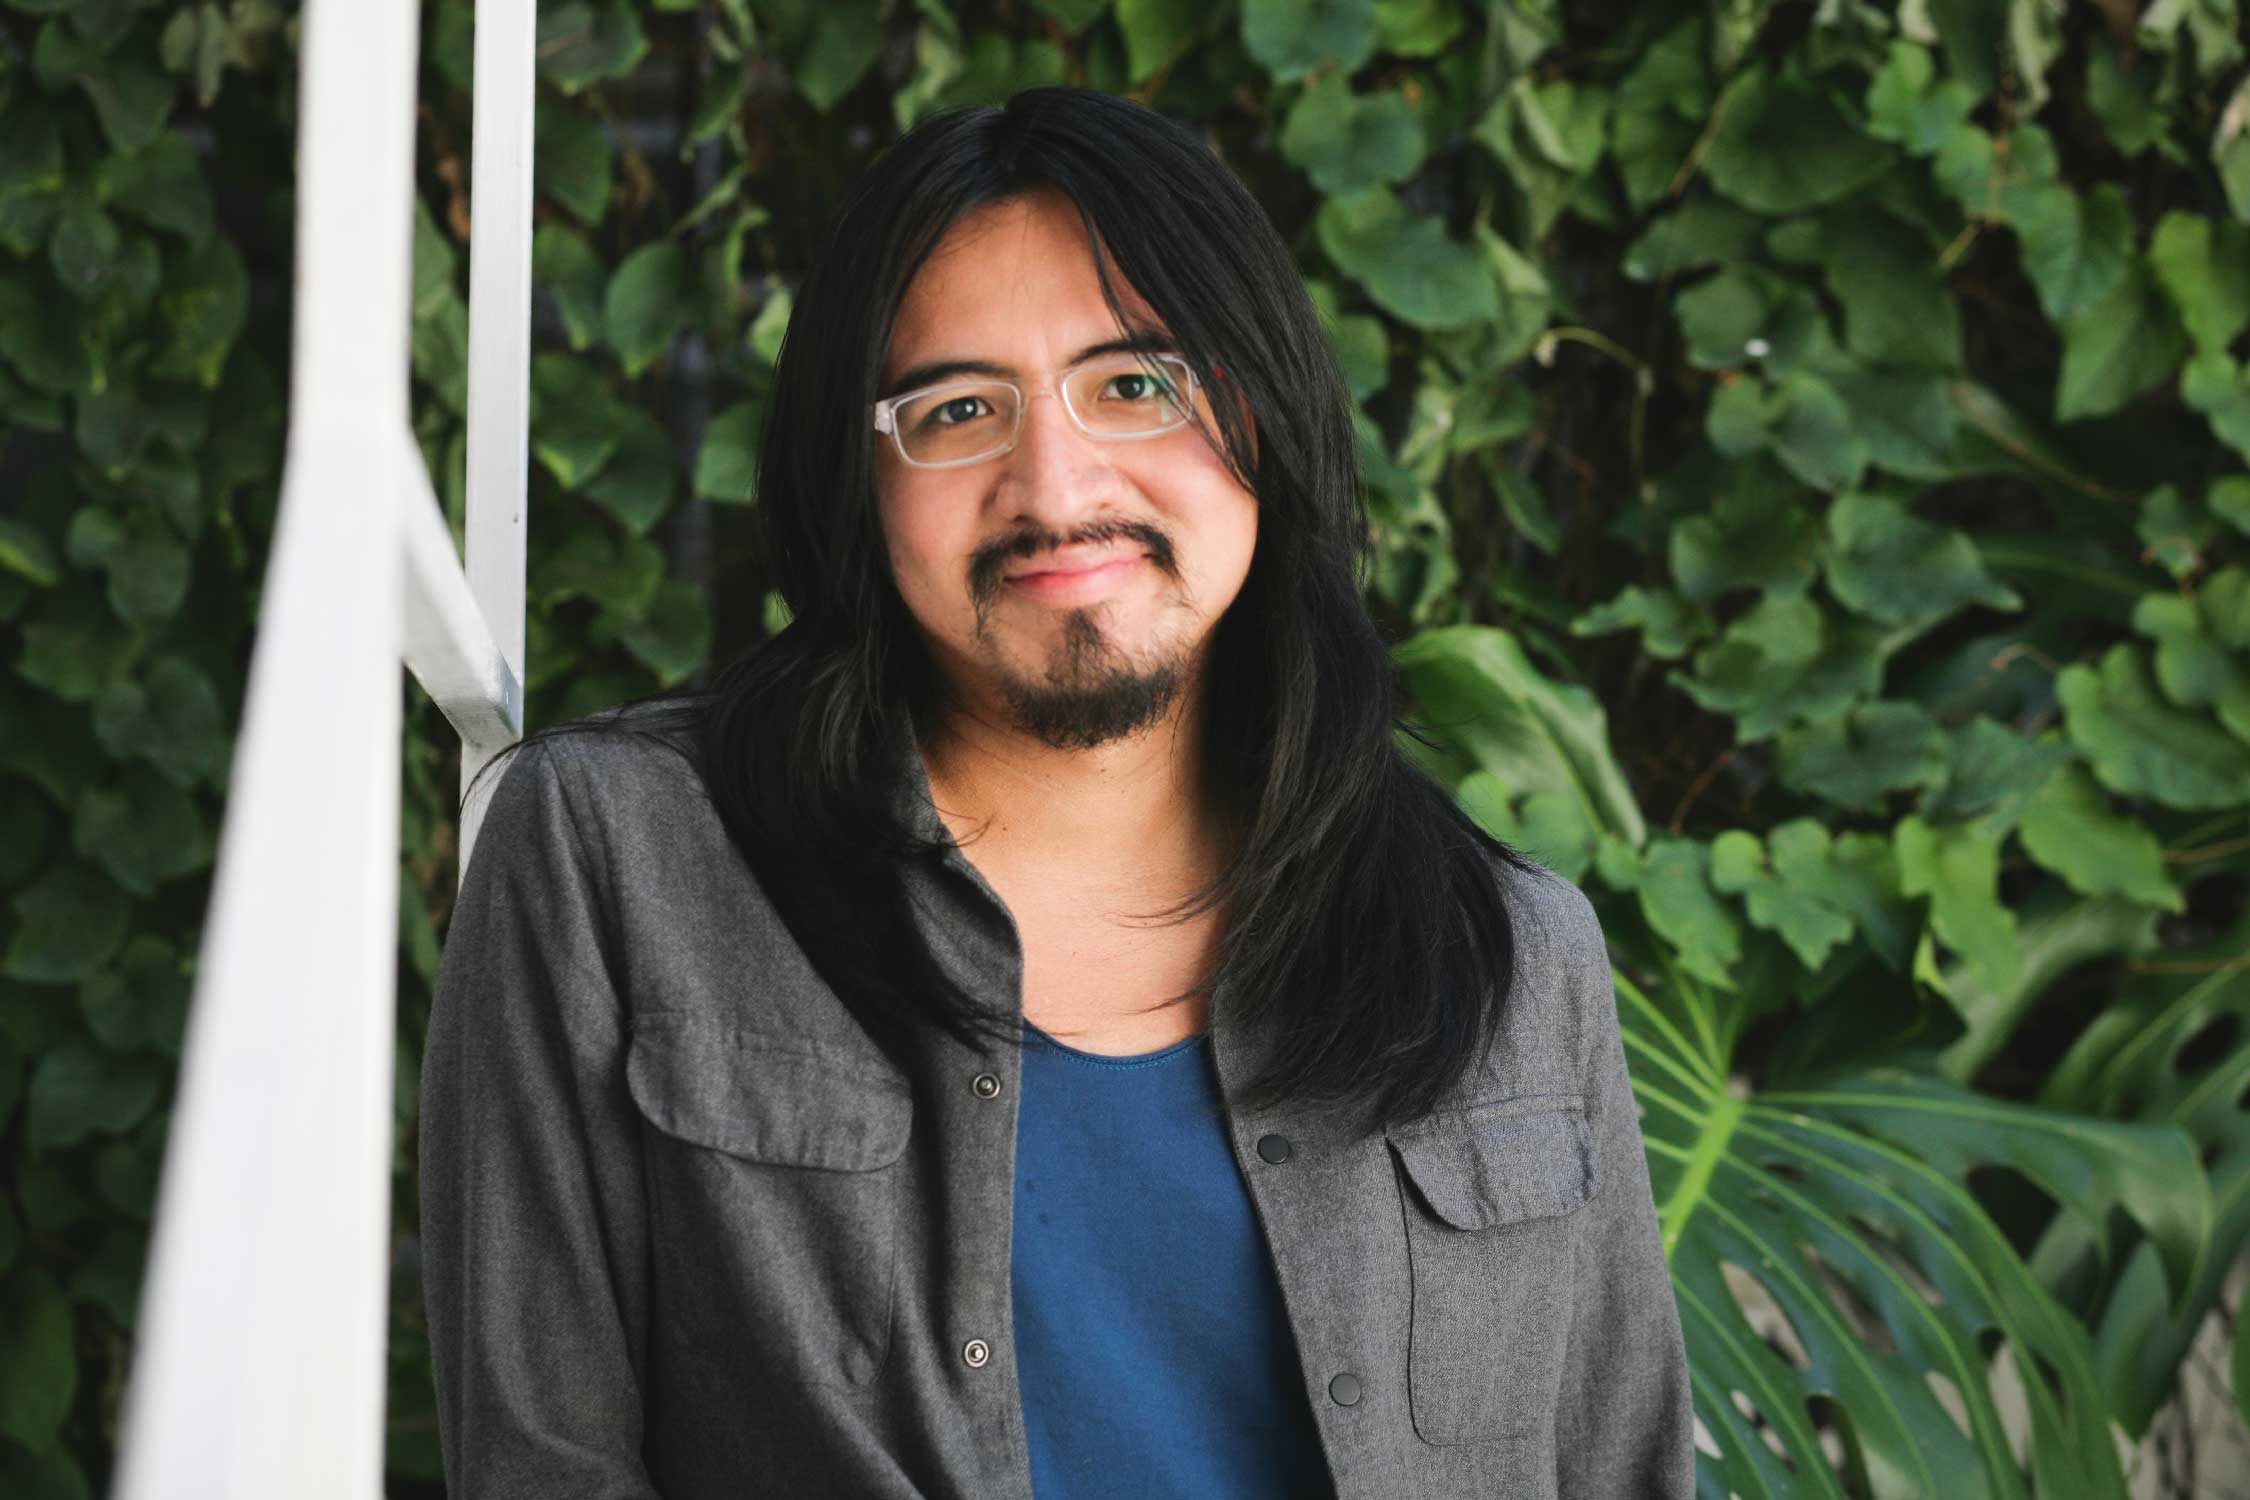 A person with light-brown skin, long straight black hair, wearing thick rectangular white frames smiles at the camera. He is wearing a grey shirt over a deep blue tshirt and is pictured against a green leafy background.